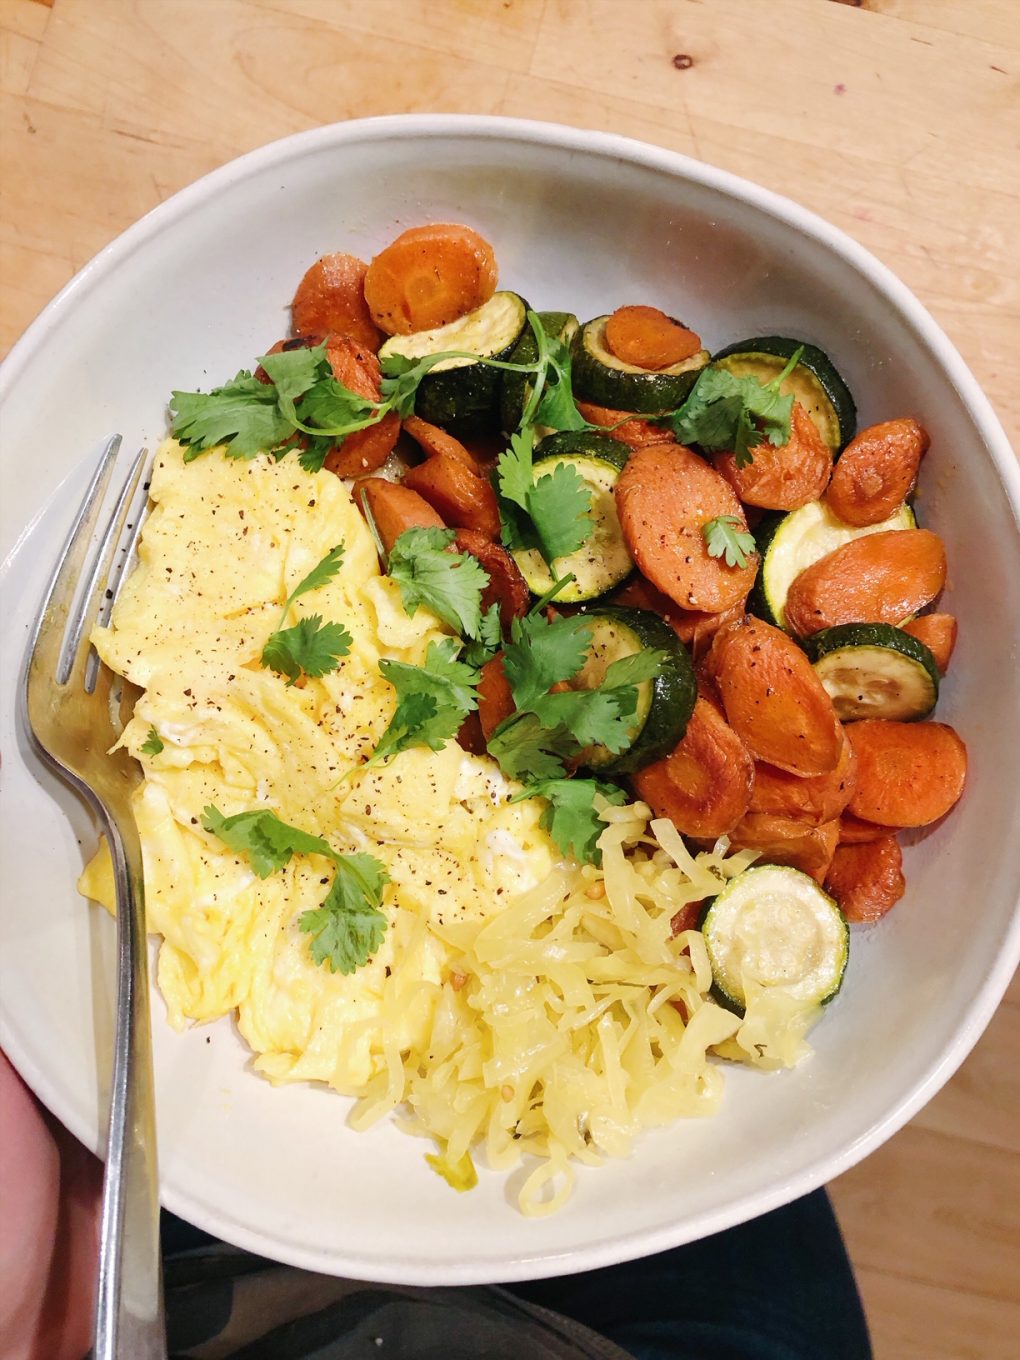 Close up of soft scrambled eggs in a large white bowl alongside some pan roasted carrots and zuchinni with cilantro sprinkled on top and a scoop of saurkraut, over wooden kitchen counter